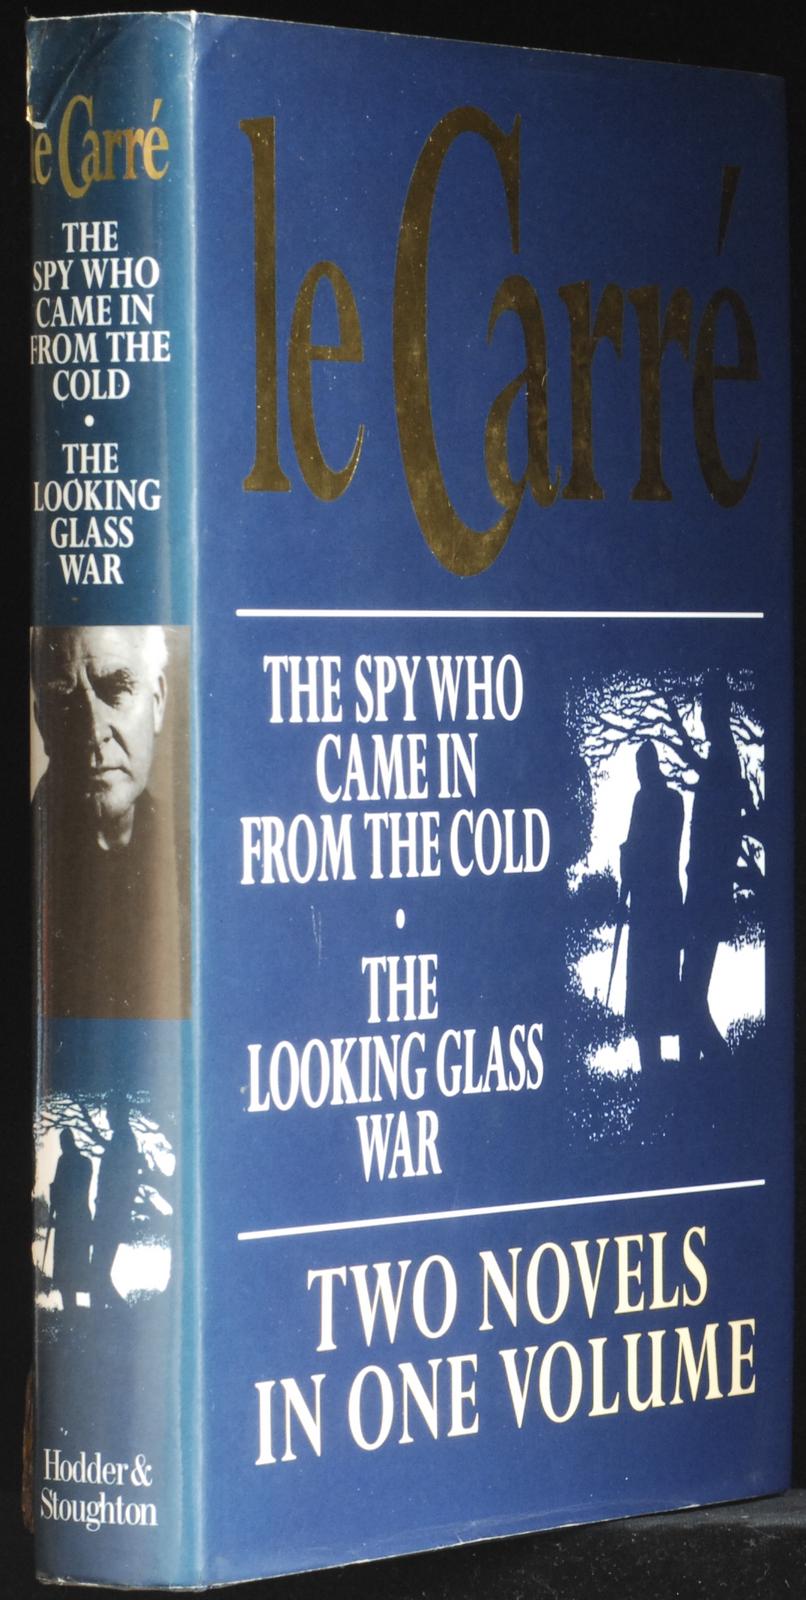 mbb006791c_-_Le_Carre_John_-_The_Spy_Who_Came_In_From_The_Cold.The_Looking_Glass_War.jpg